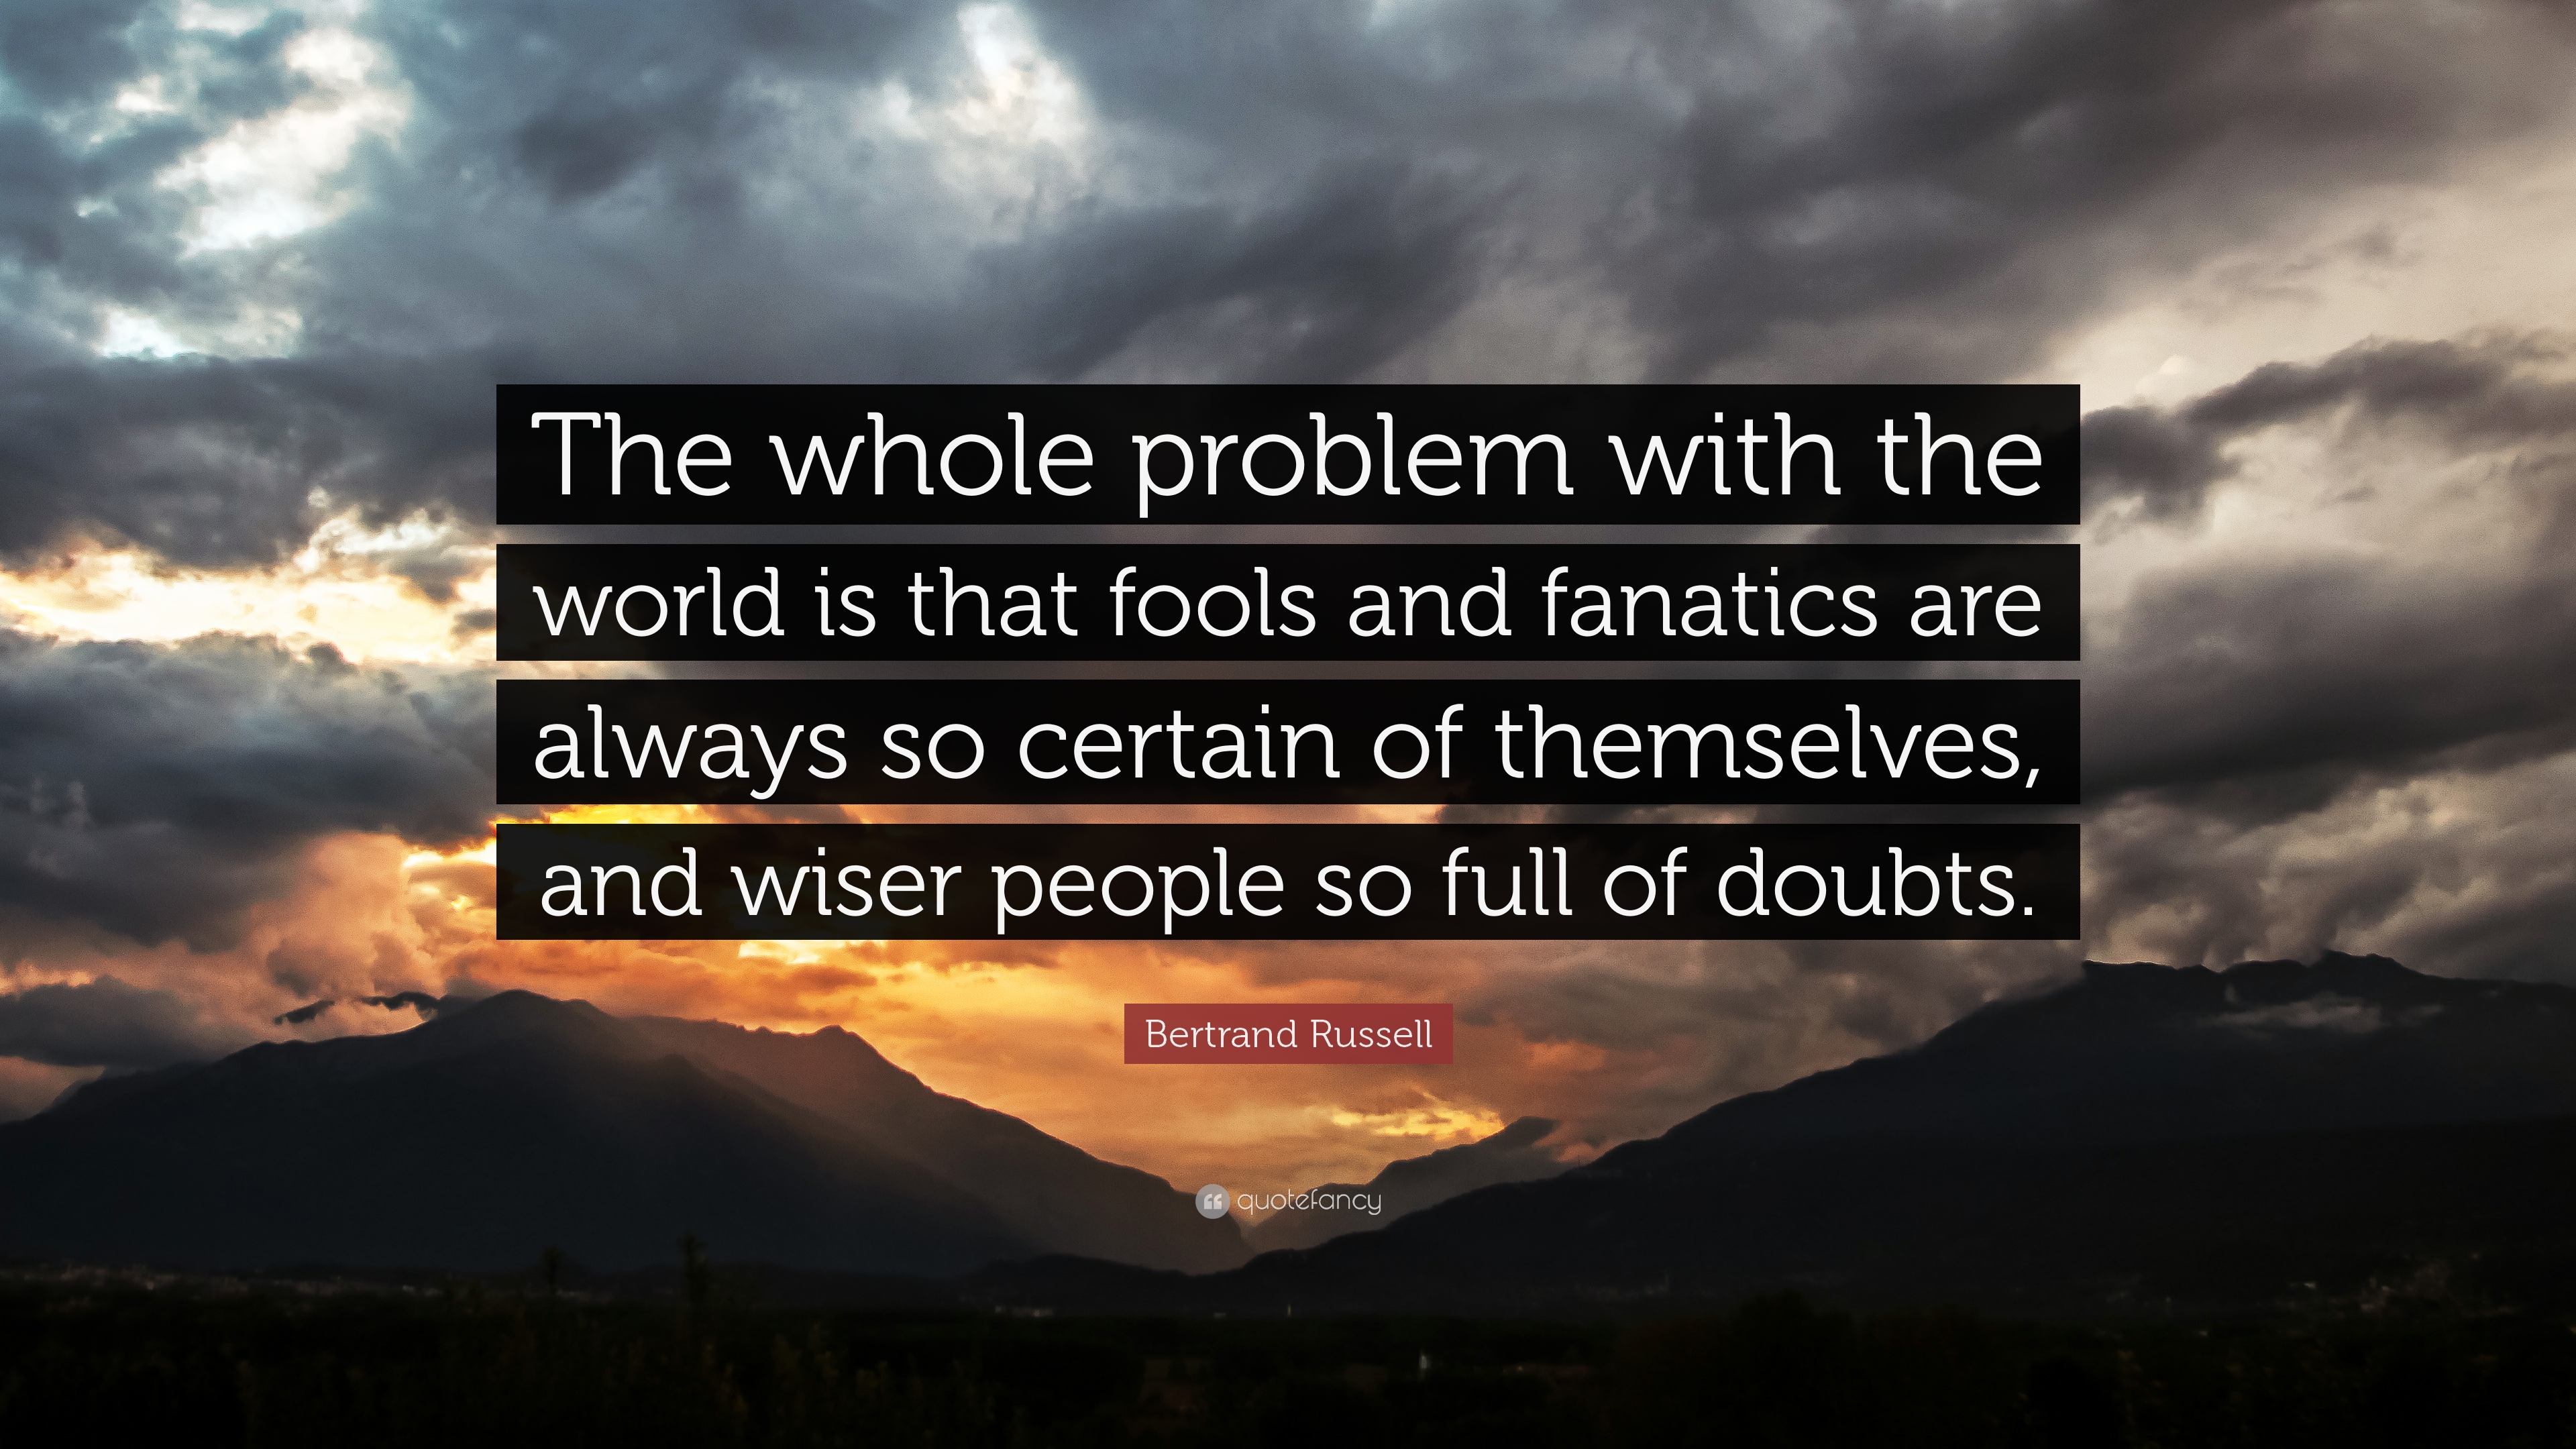 Bertrand Russell Quote: “The whole problem with the world is that fools and fanatics are always so certain of themselves, and wiser people so ful.”